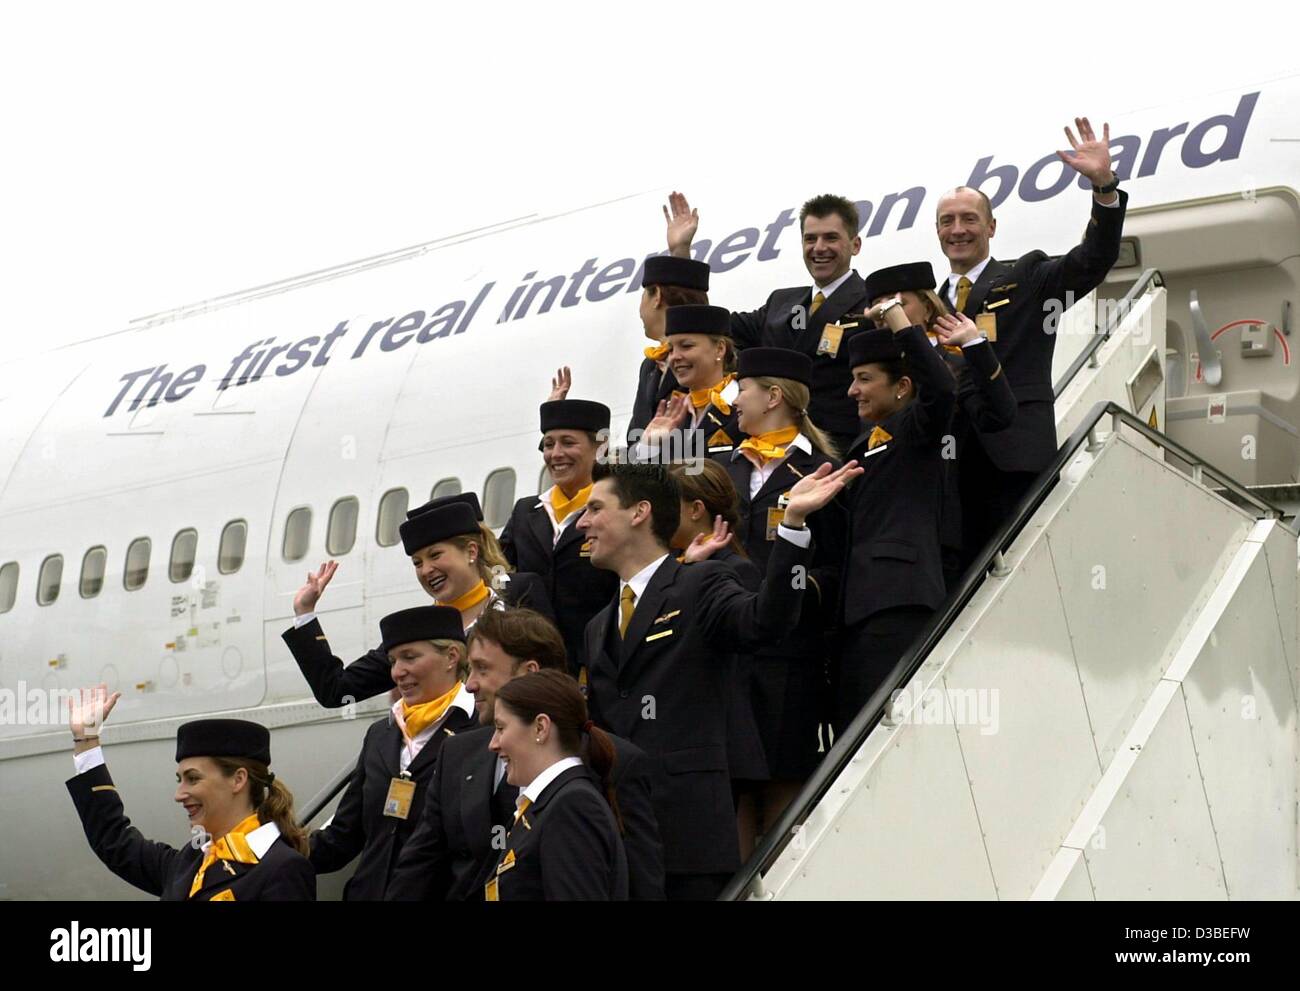 (dpa) - Lufthansa cabin staff are standing and waving on the steps to a Boeing 747-400 labelled with the slogan 'The first real internet on board', Frankfurt, 15 January 2003. Lufthansa is the first airline to be testing a fast access to the internet for passengers. This is offered on scheduled flig Stock Photo